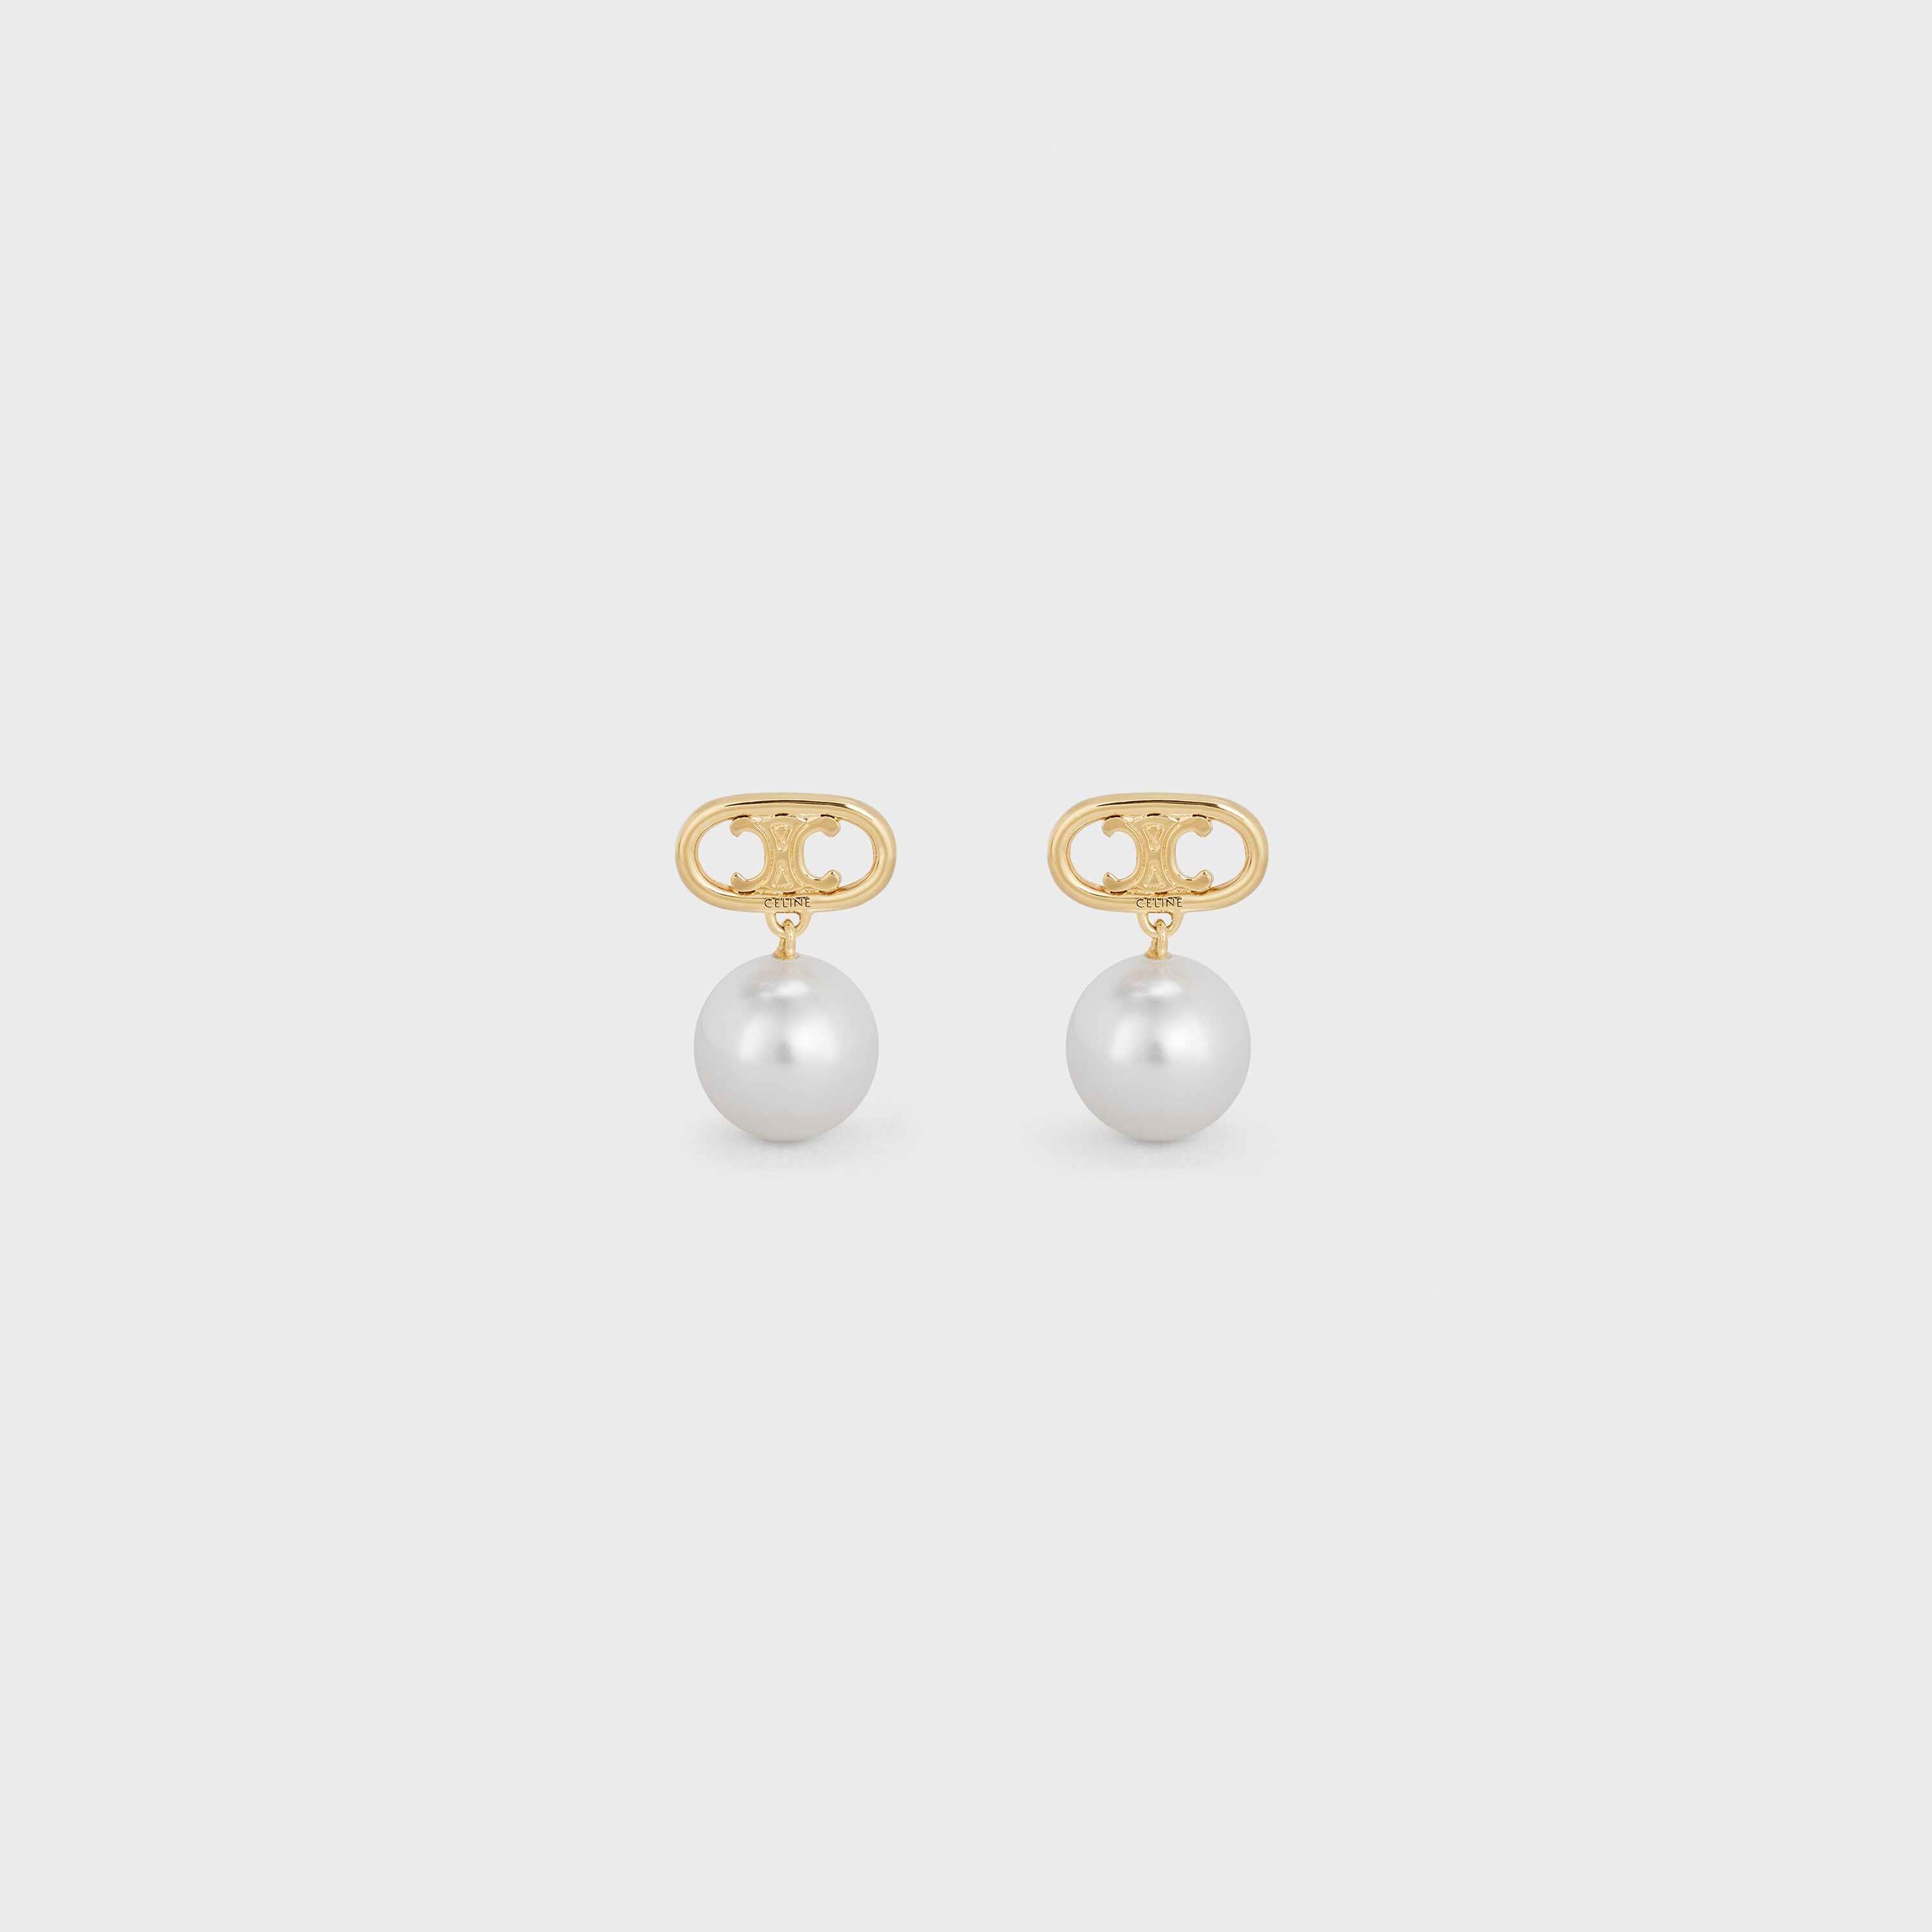 Triomphe Pearl Earrings in Brass with Gold Finish and Glass Pearls - 1